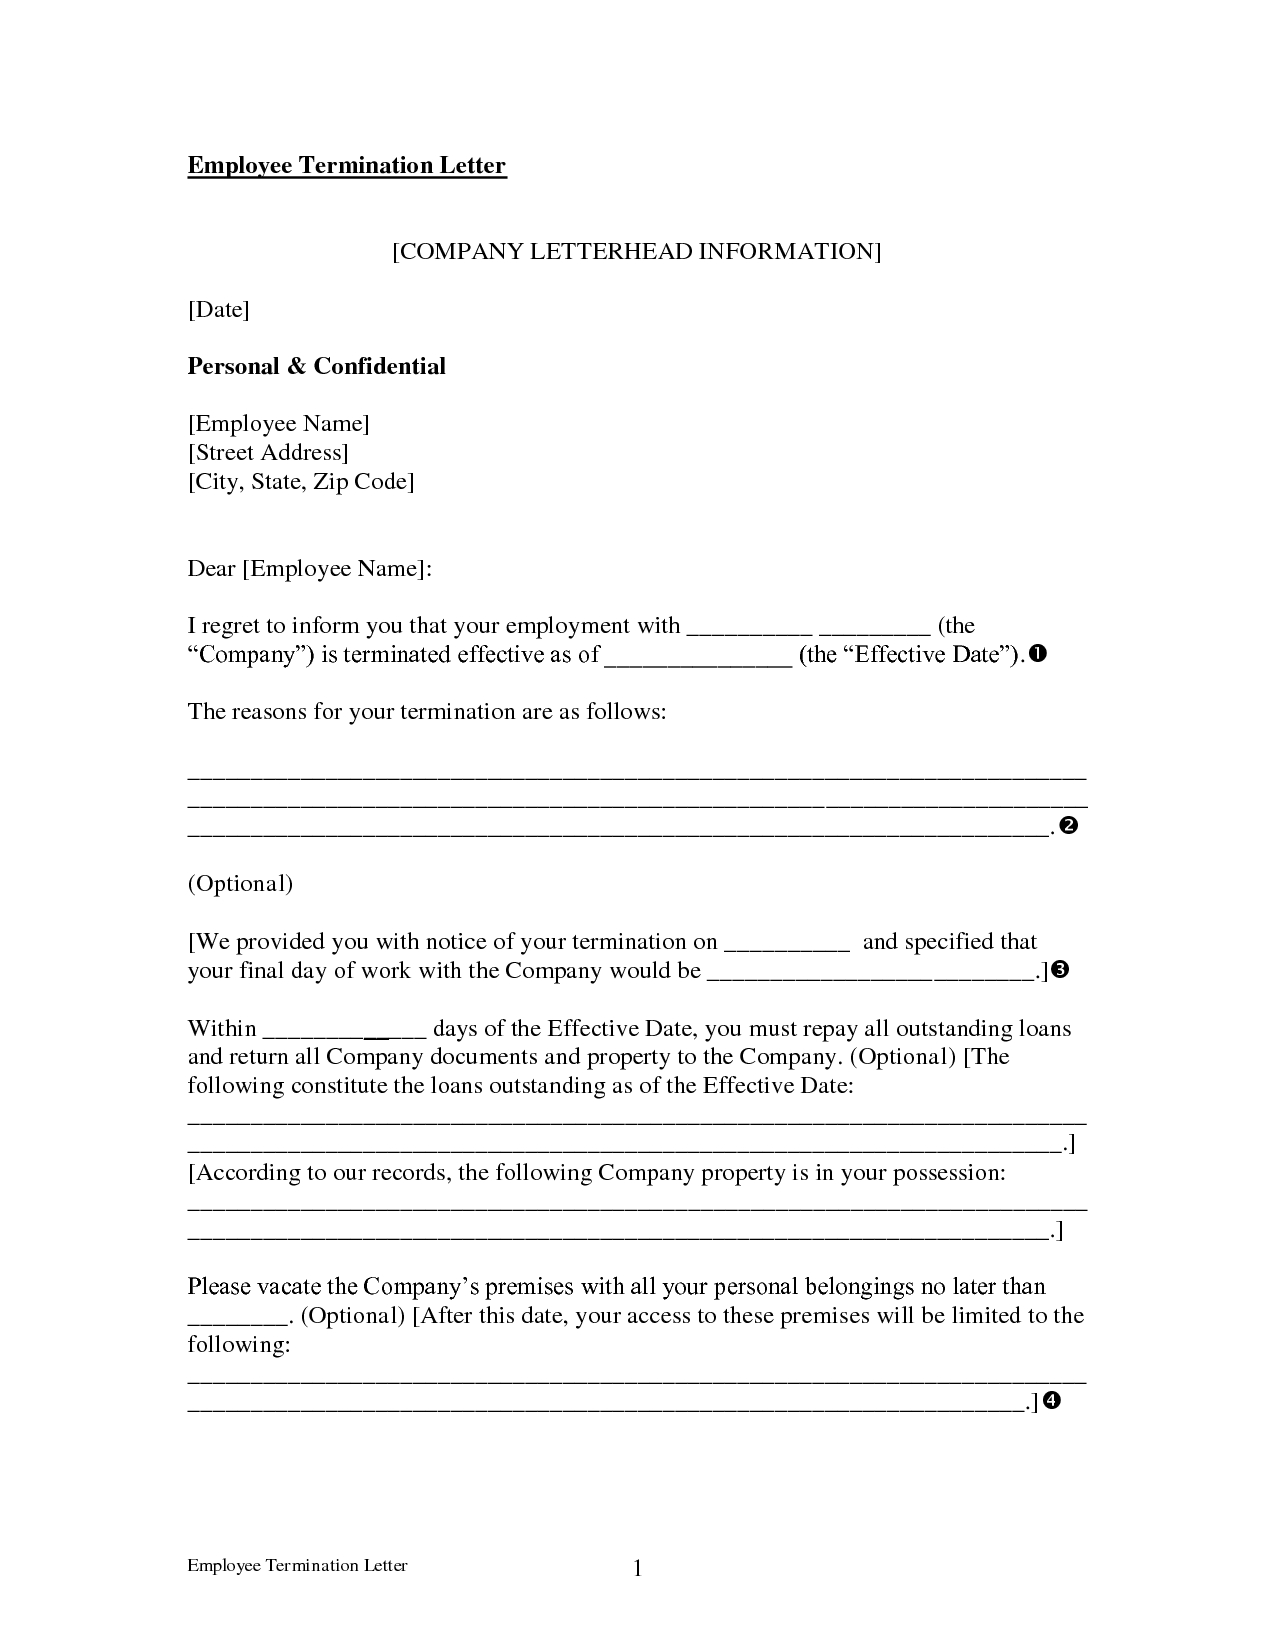 Termination Letter Template - Example Termination Letter to Employee Samples